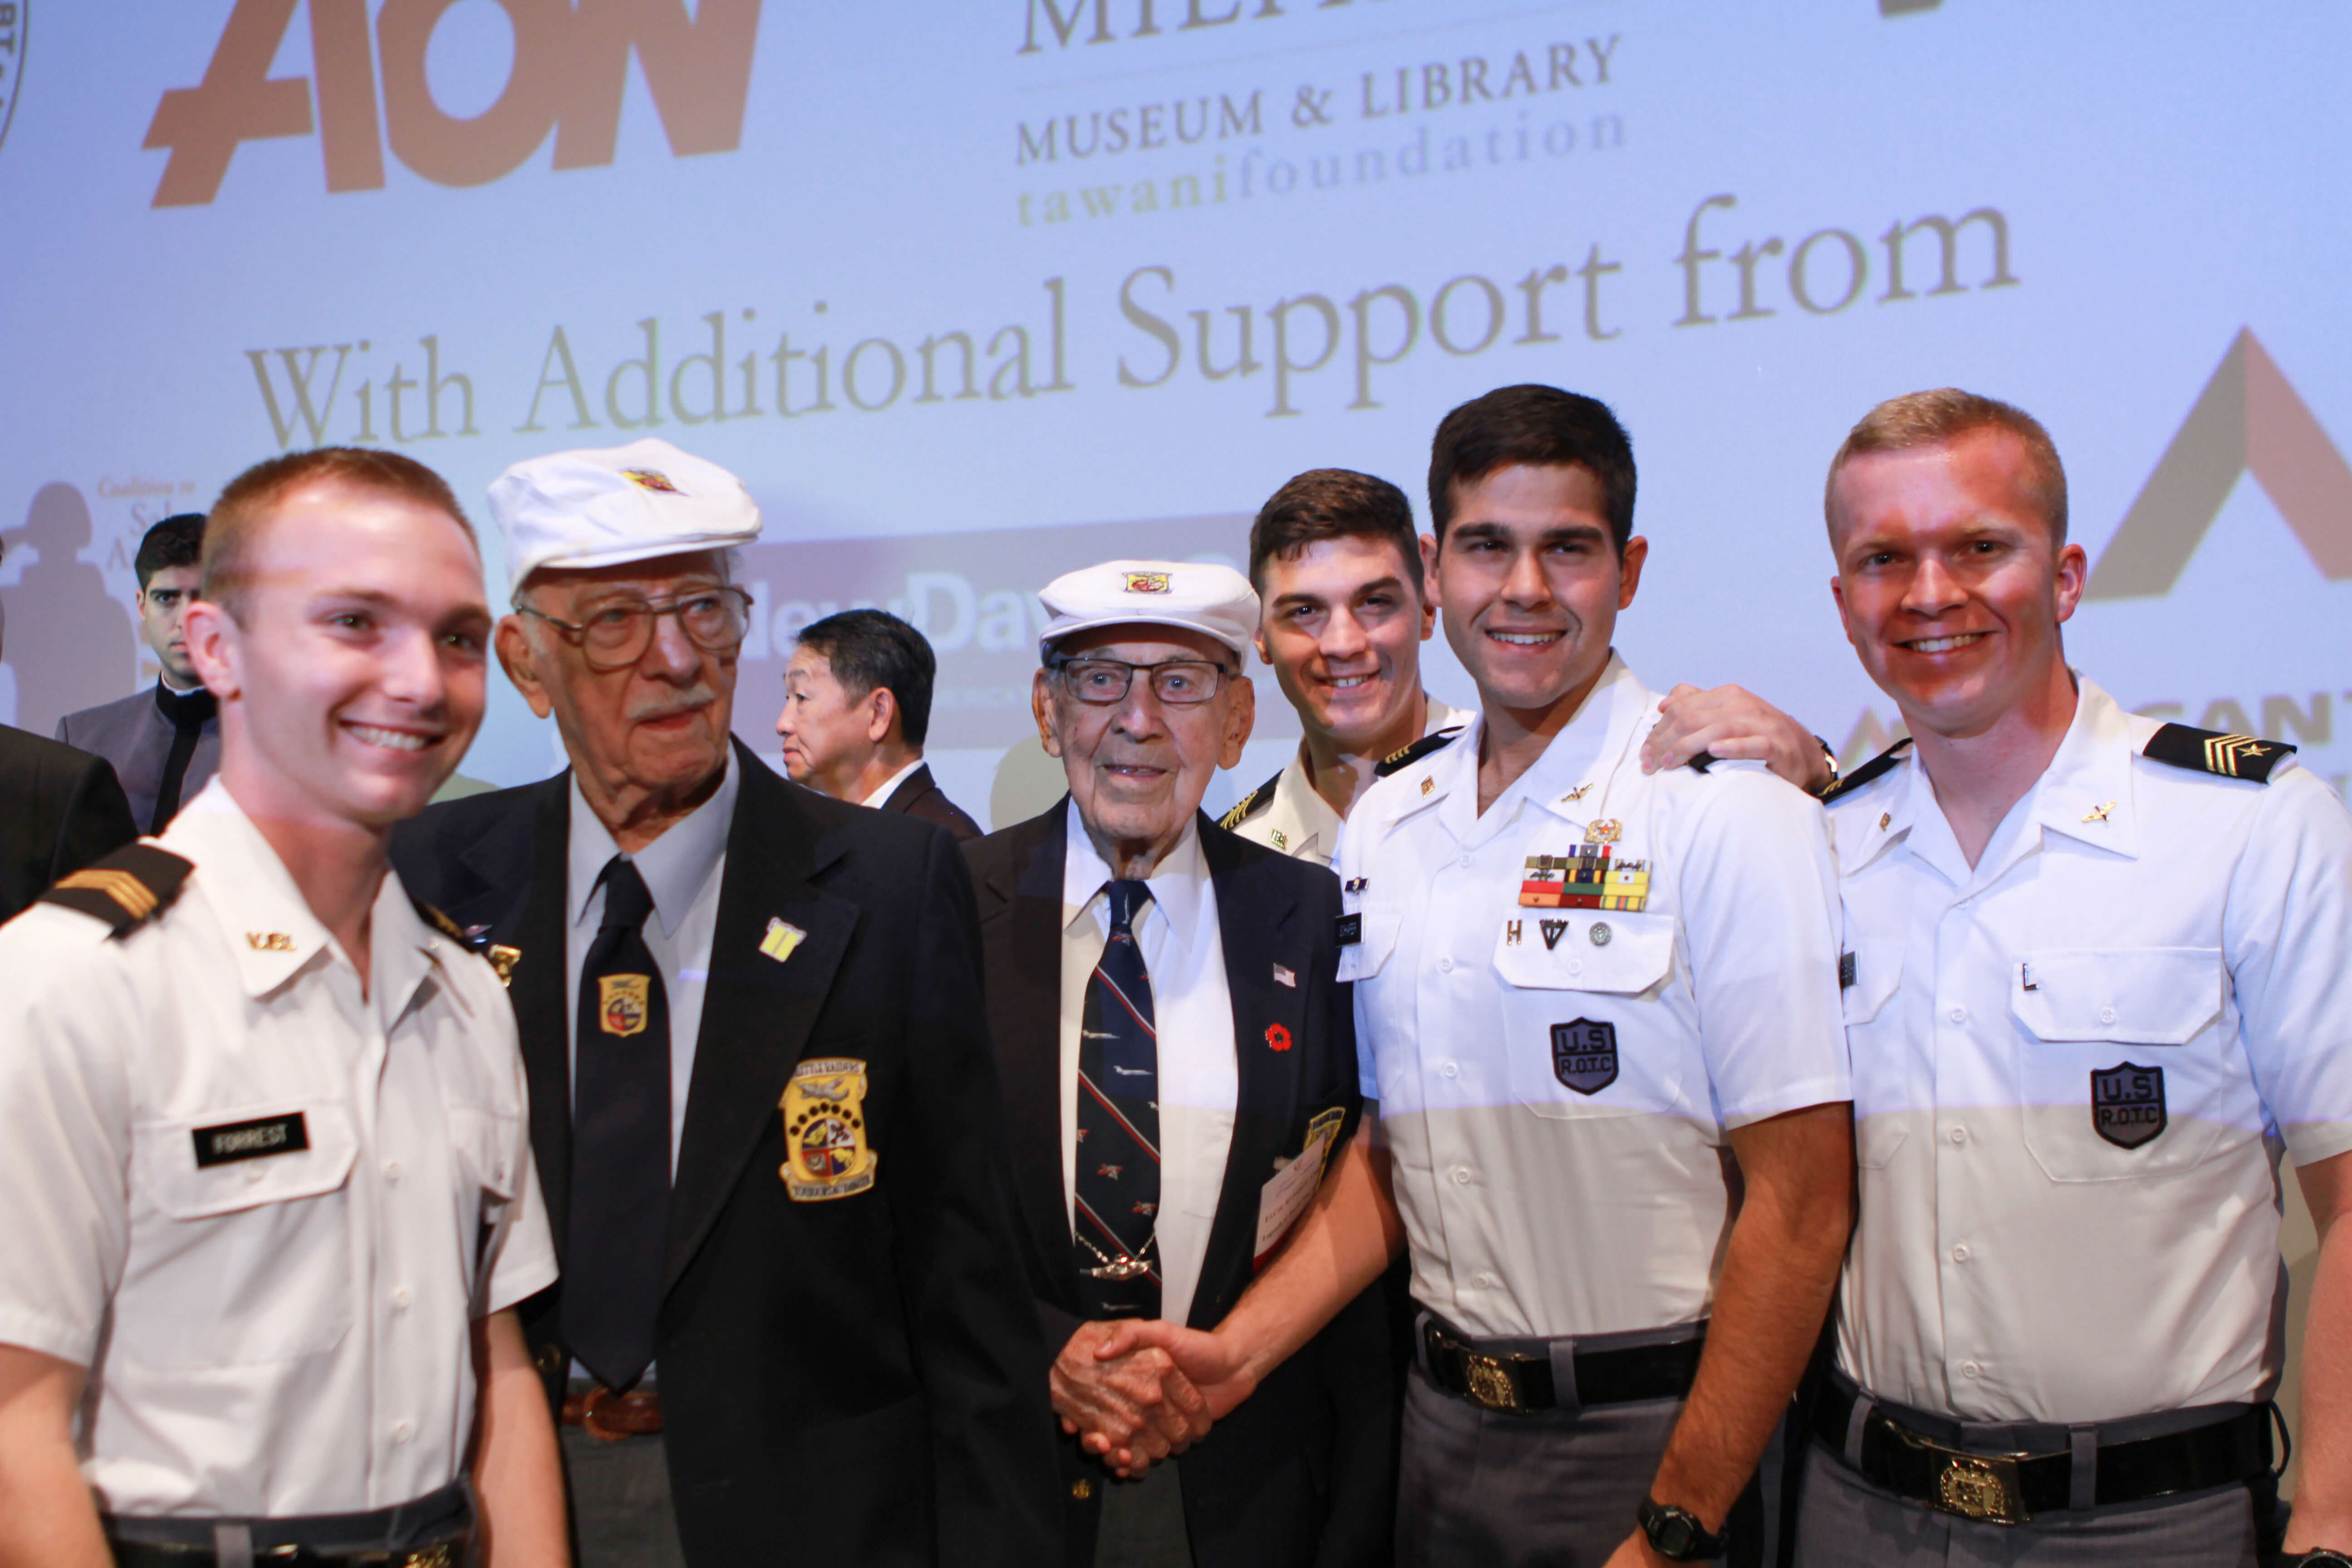 Doolittle Raiders LTC Edward Saylor and LTC Richard Cole pose with conference attendees.